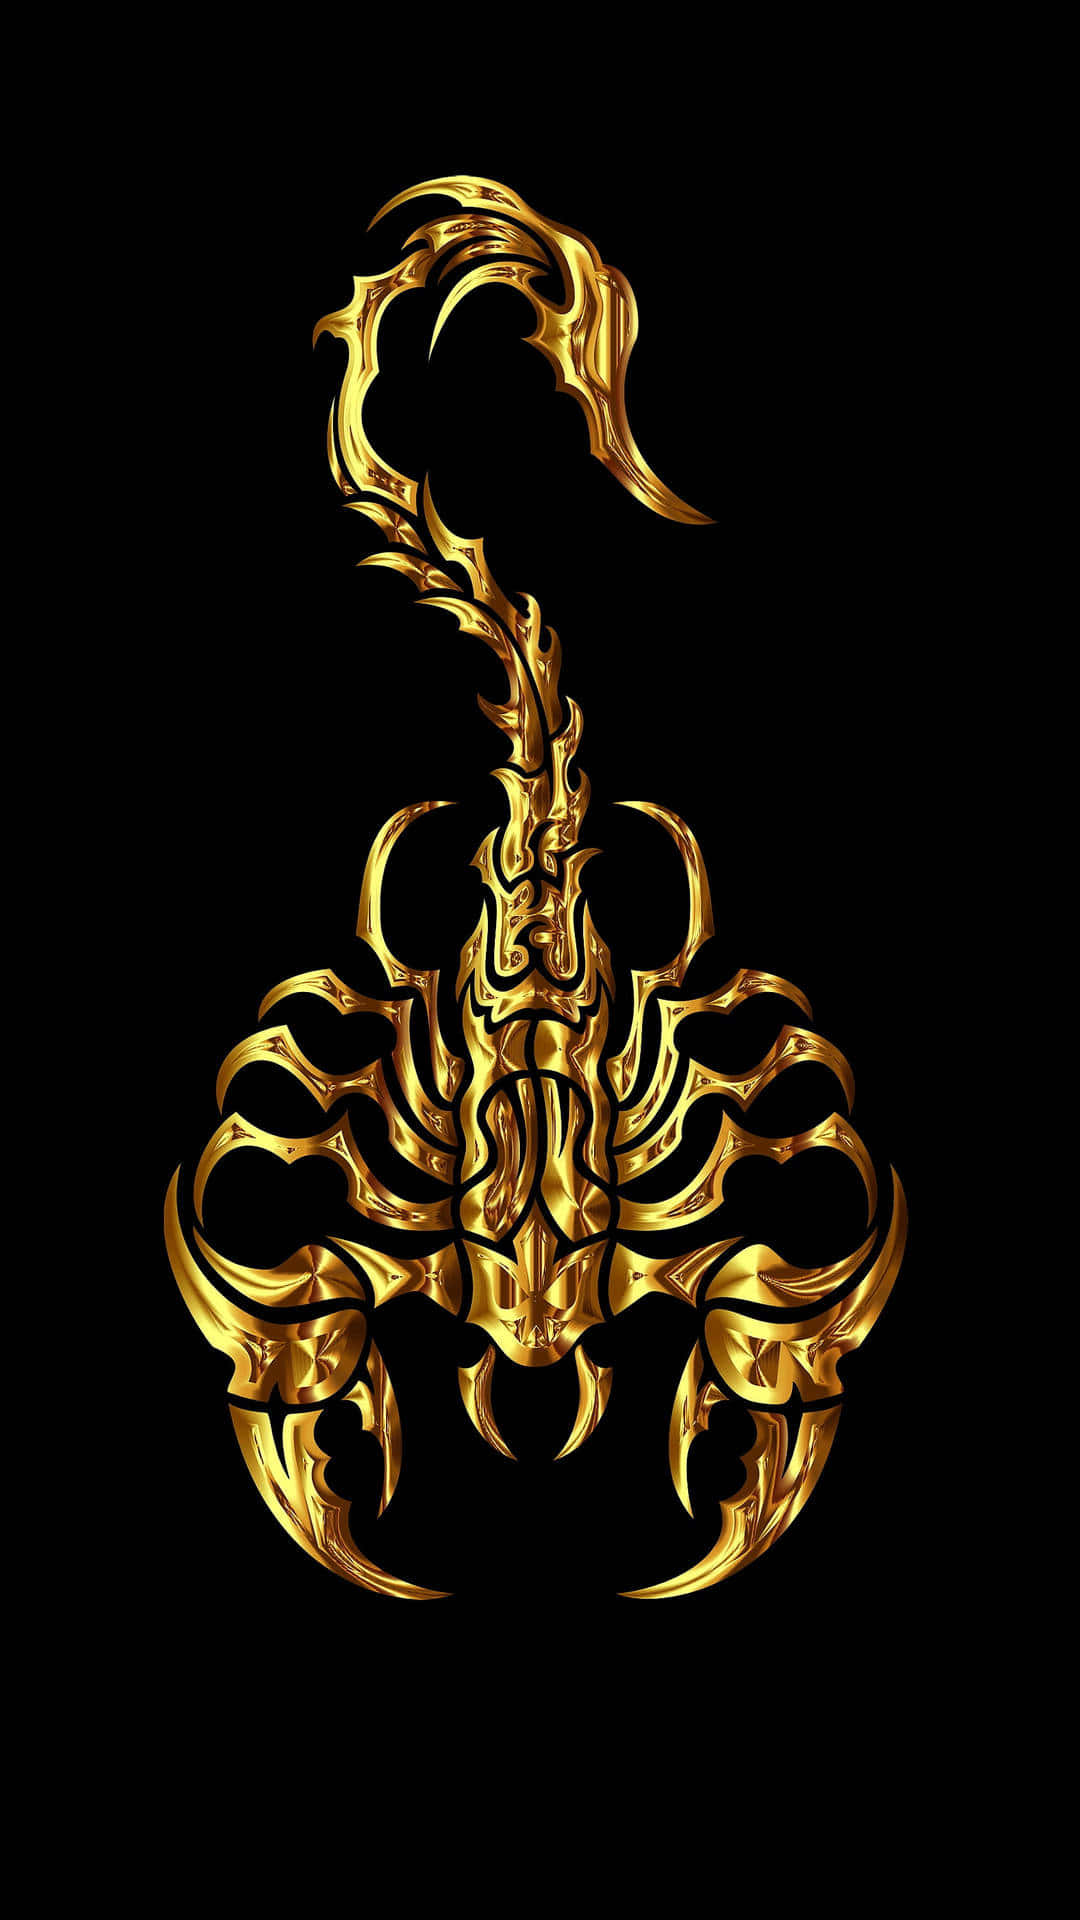 Scorpion Black And Gold Aesthetic Wallpaper